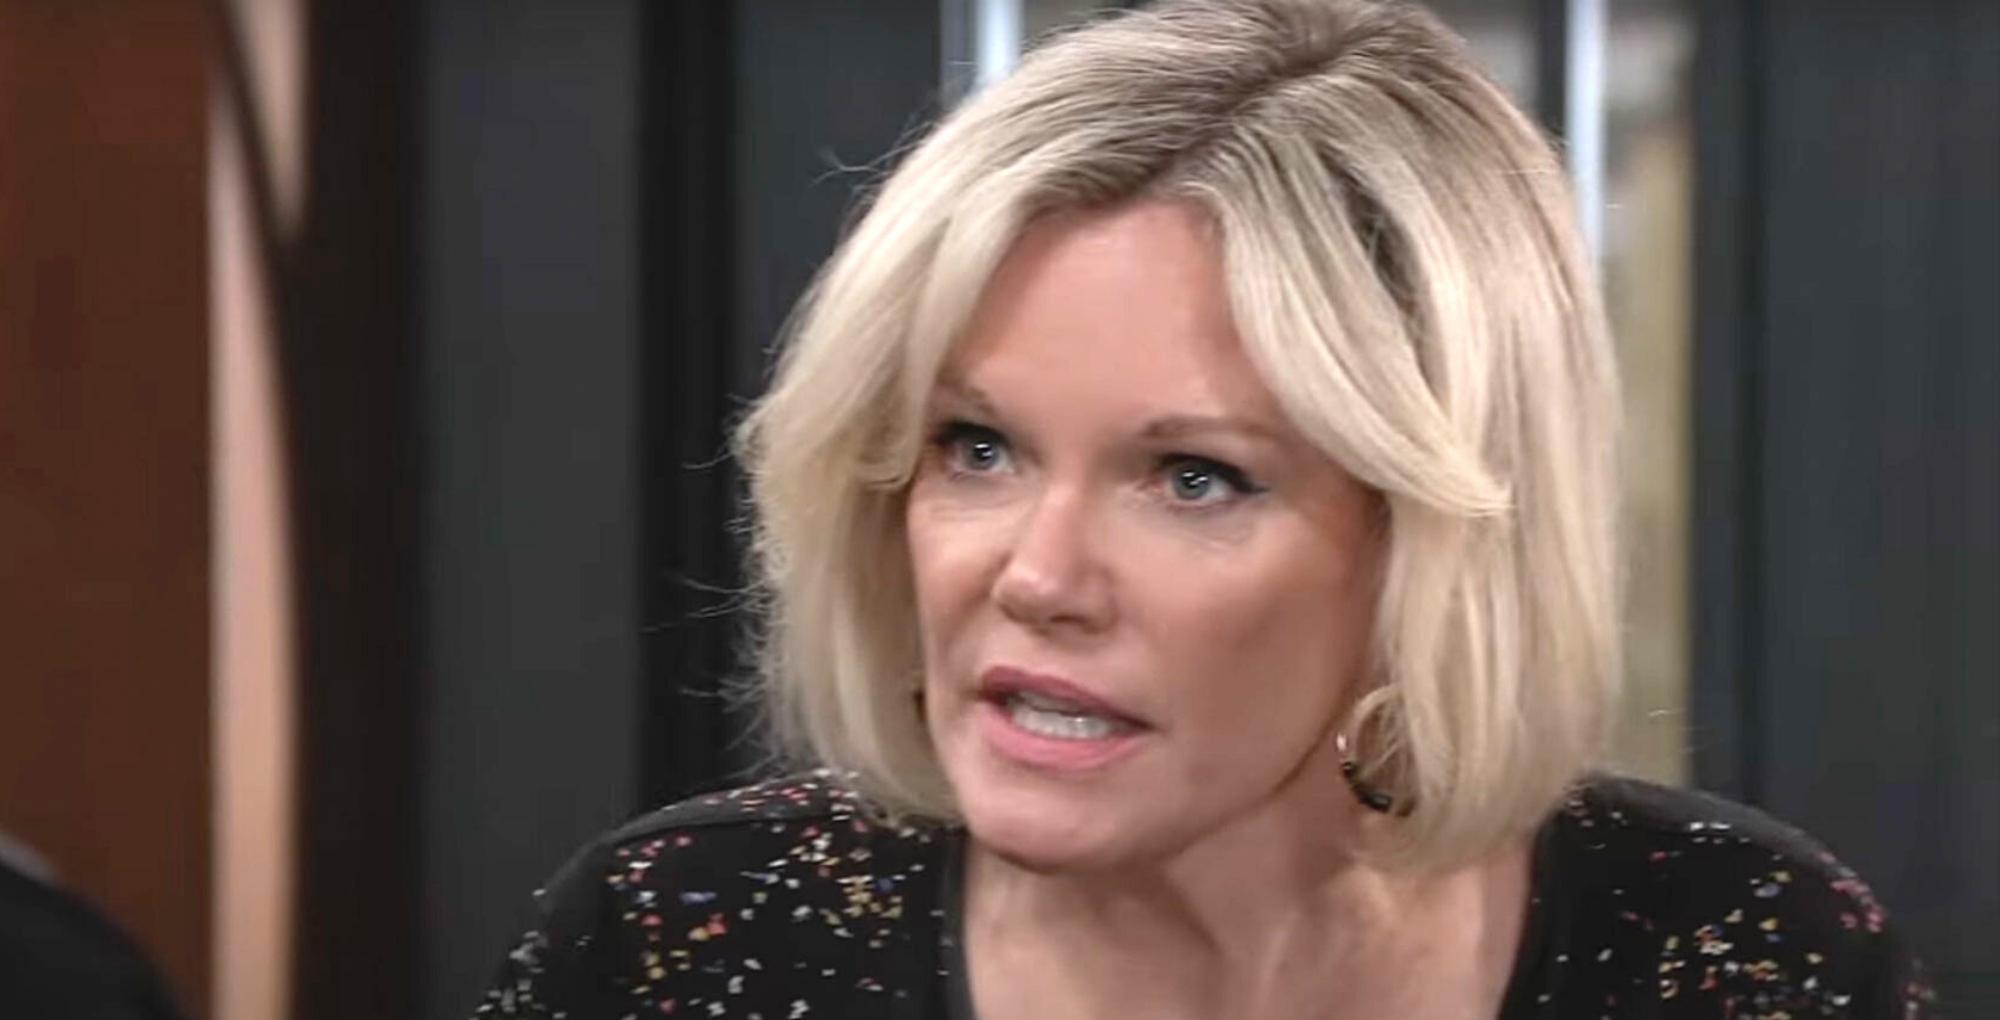 General Hospital Spoilers: Ava Has A Dire Warning For Nina